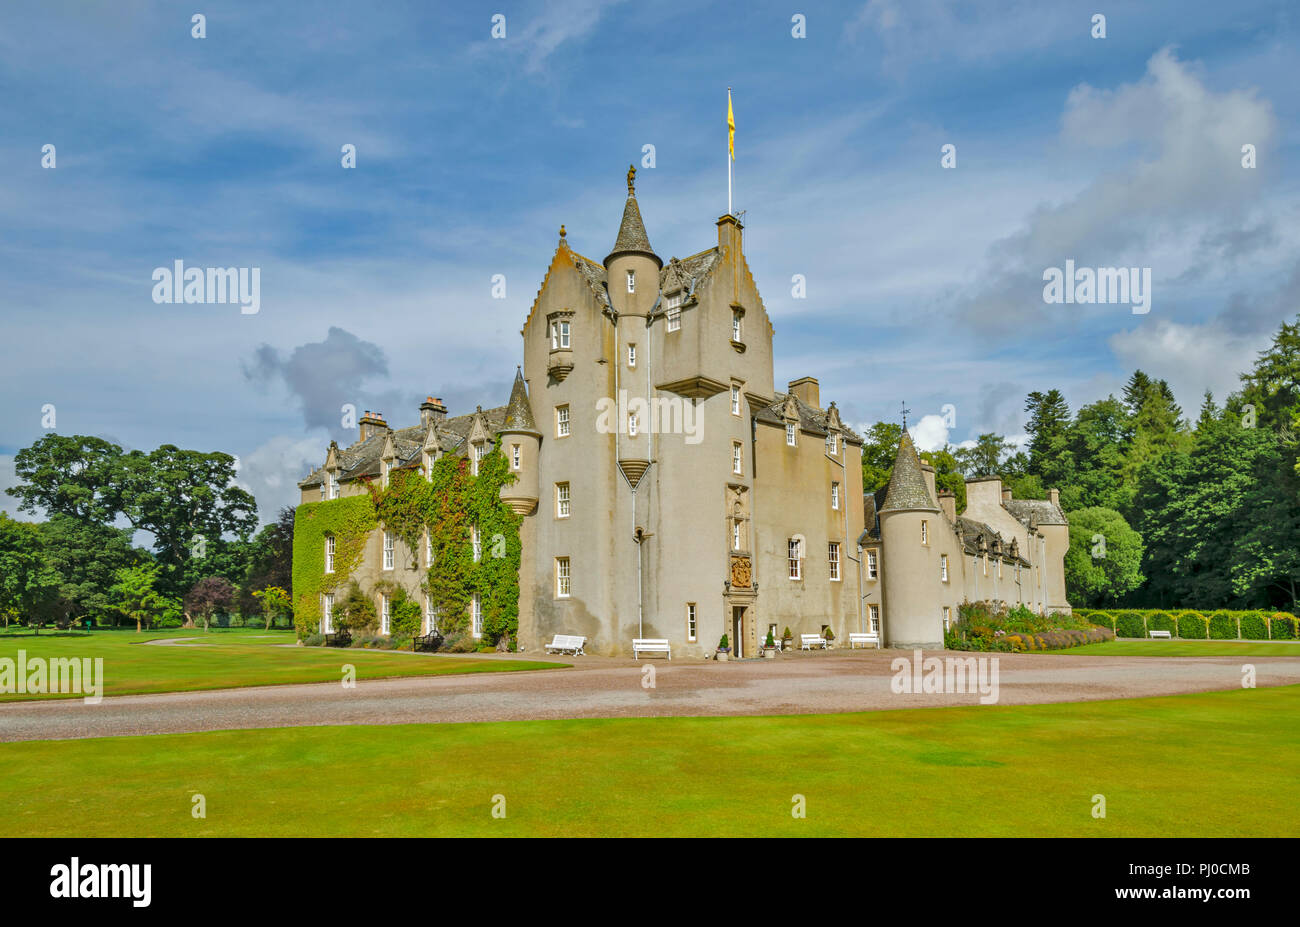 BALLINDALLOCH CASTLE BANFFSHIRE SCOTLAND VIEW OF  THE CASTLE LAWNS AND BORDER GARDEN IN LATE SUMMER Stock Photo